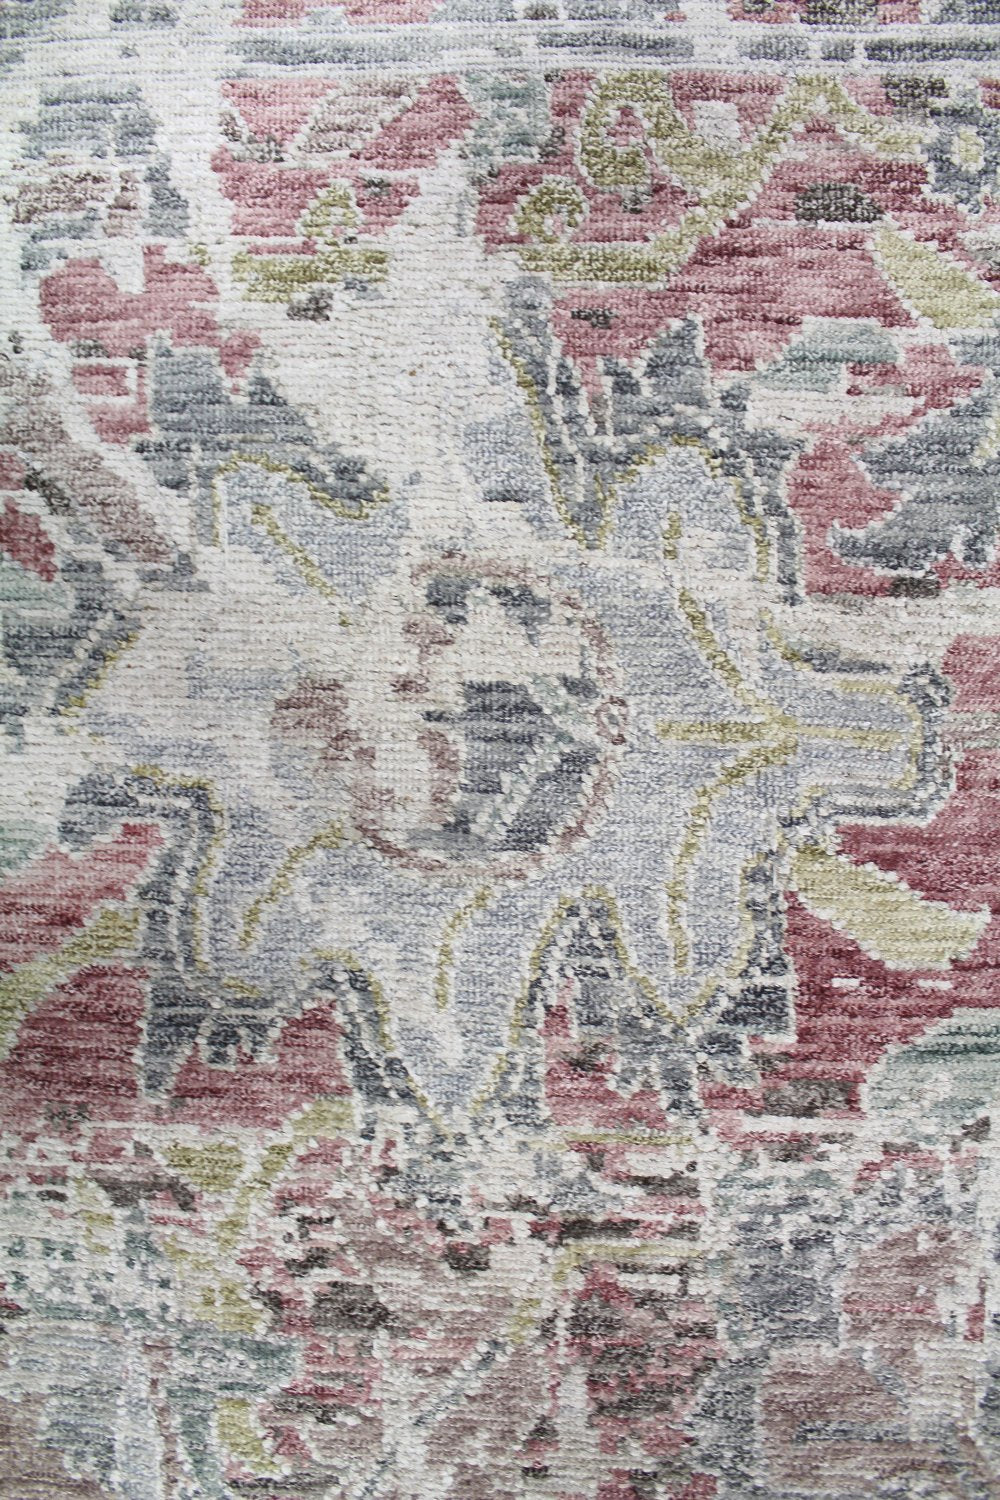 Cloud Band Handwoven Transitional Rug, 64730